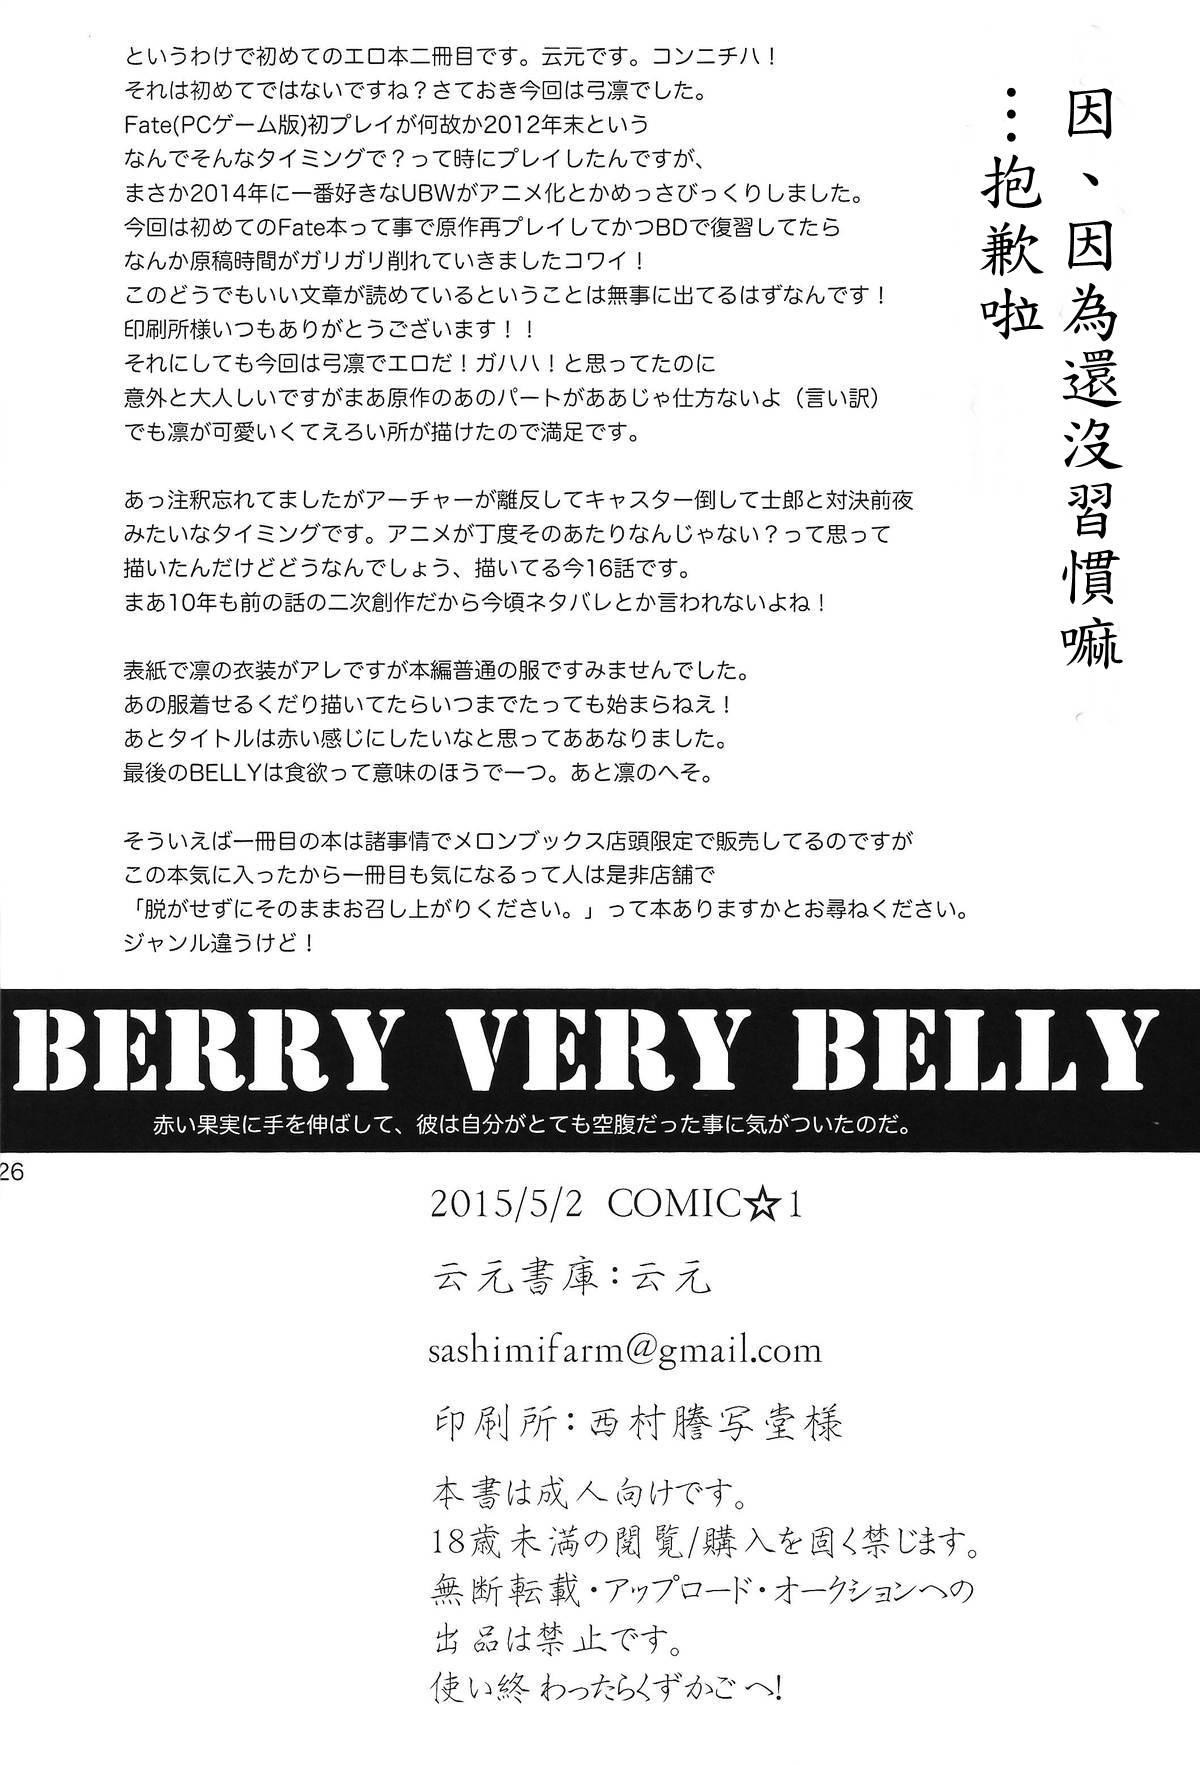 BERRY VERY BELLY 23